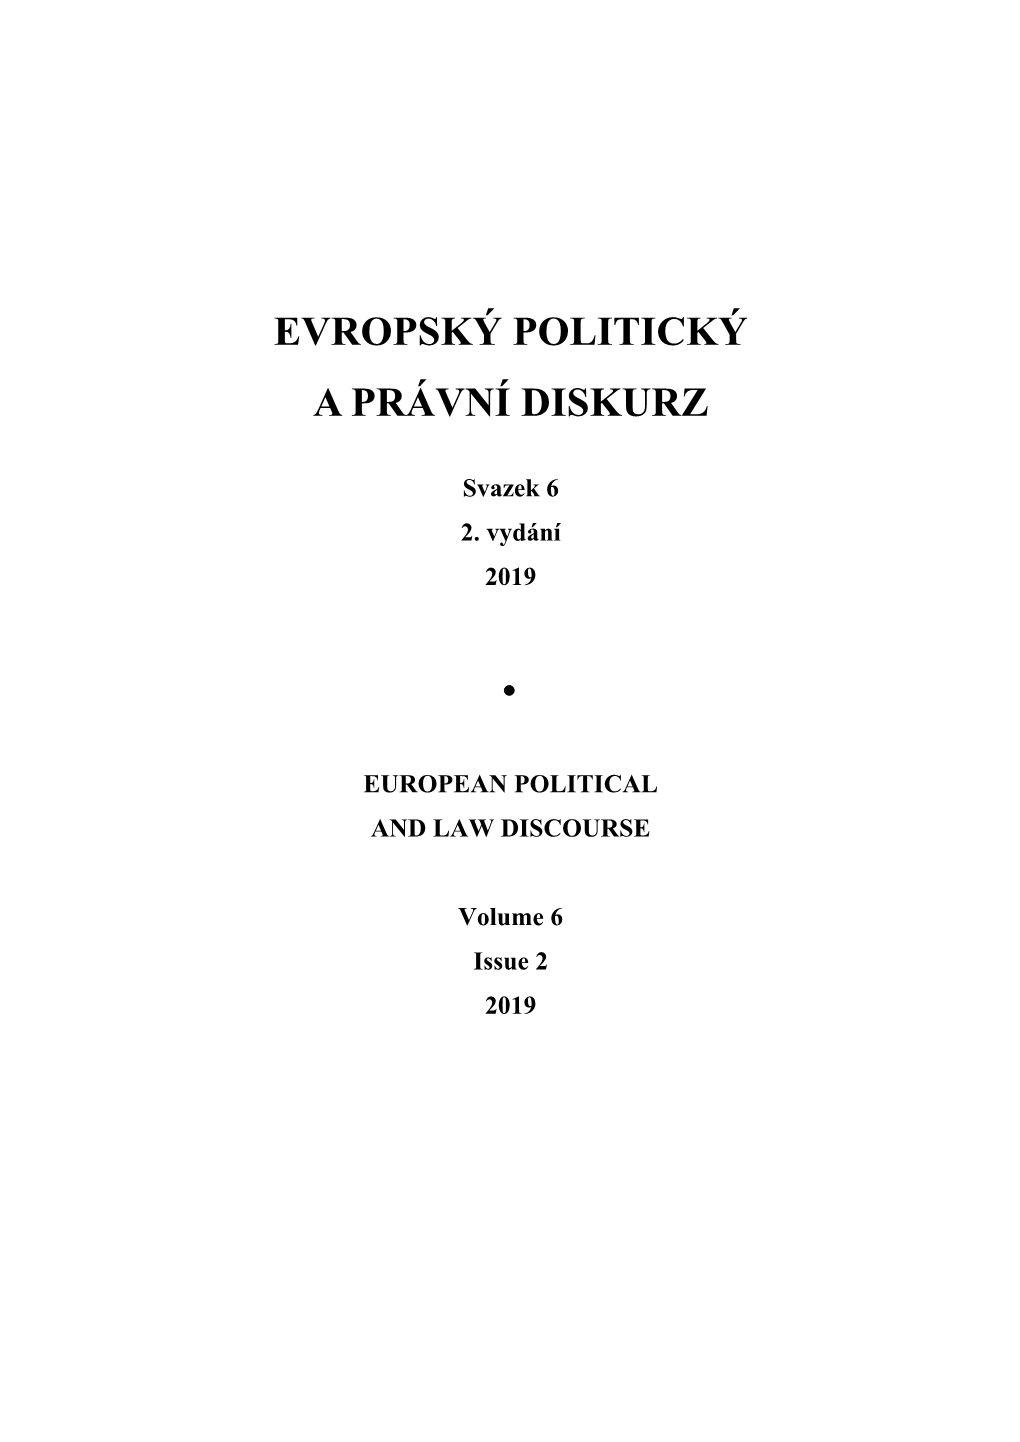 European Political and Law Discourse, 2019, Volume 6, Issue 2